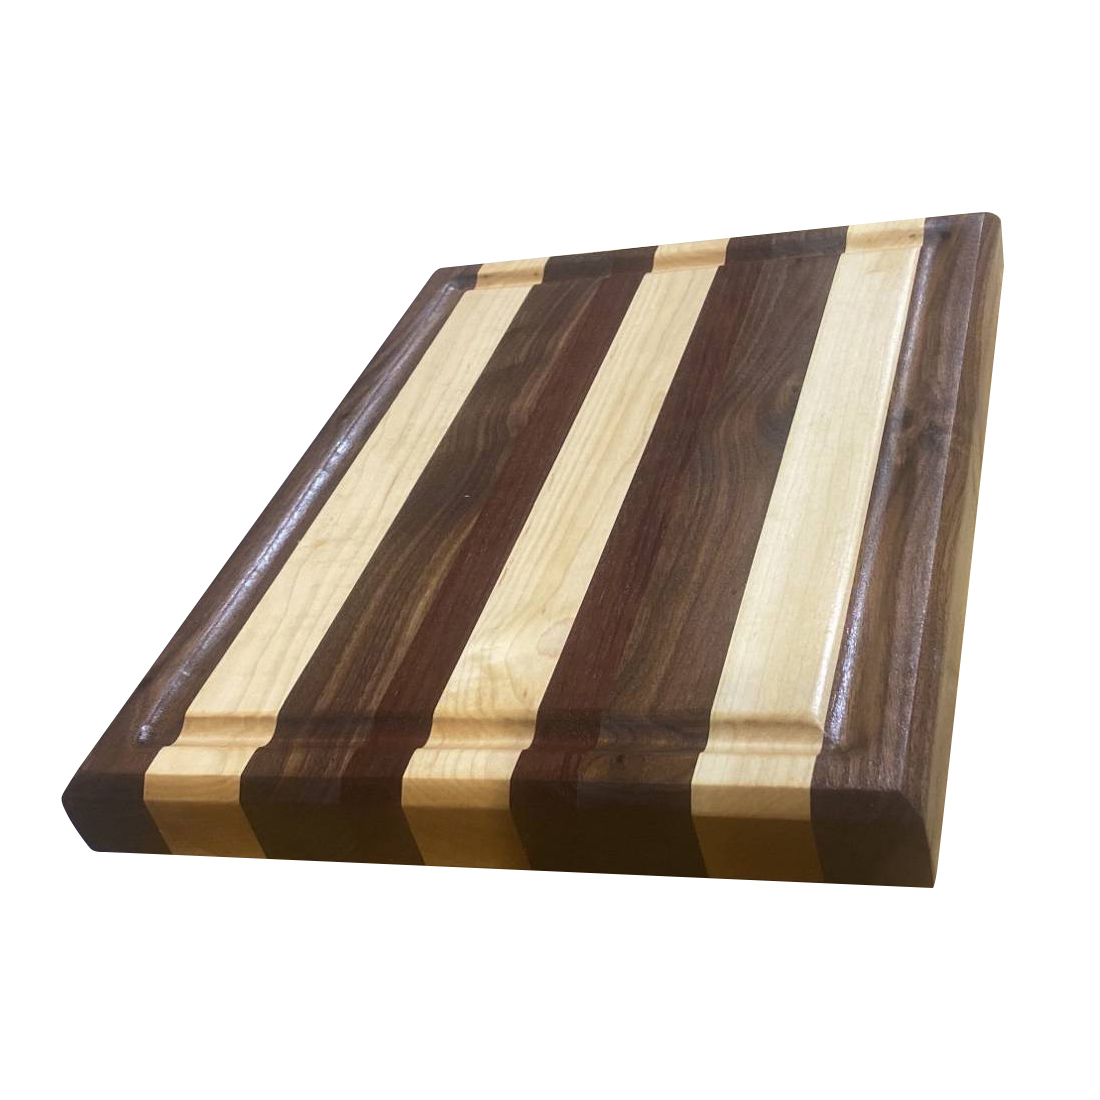 https://smwdesigns.net/wp-content/uploads/2020/10/thick-maple-walnut-and-purple-heart-rectangle-cutting-board-3.jpg